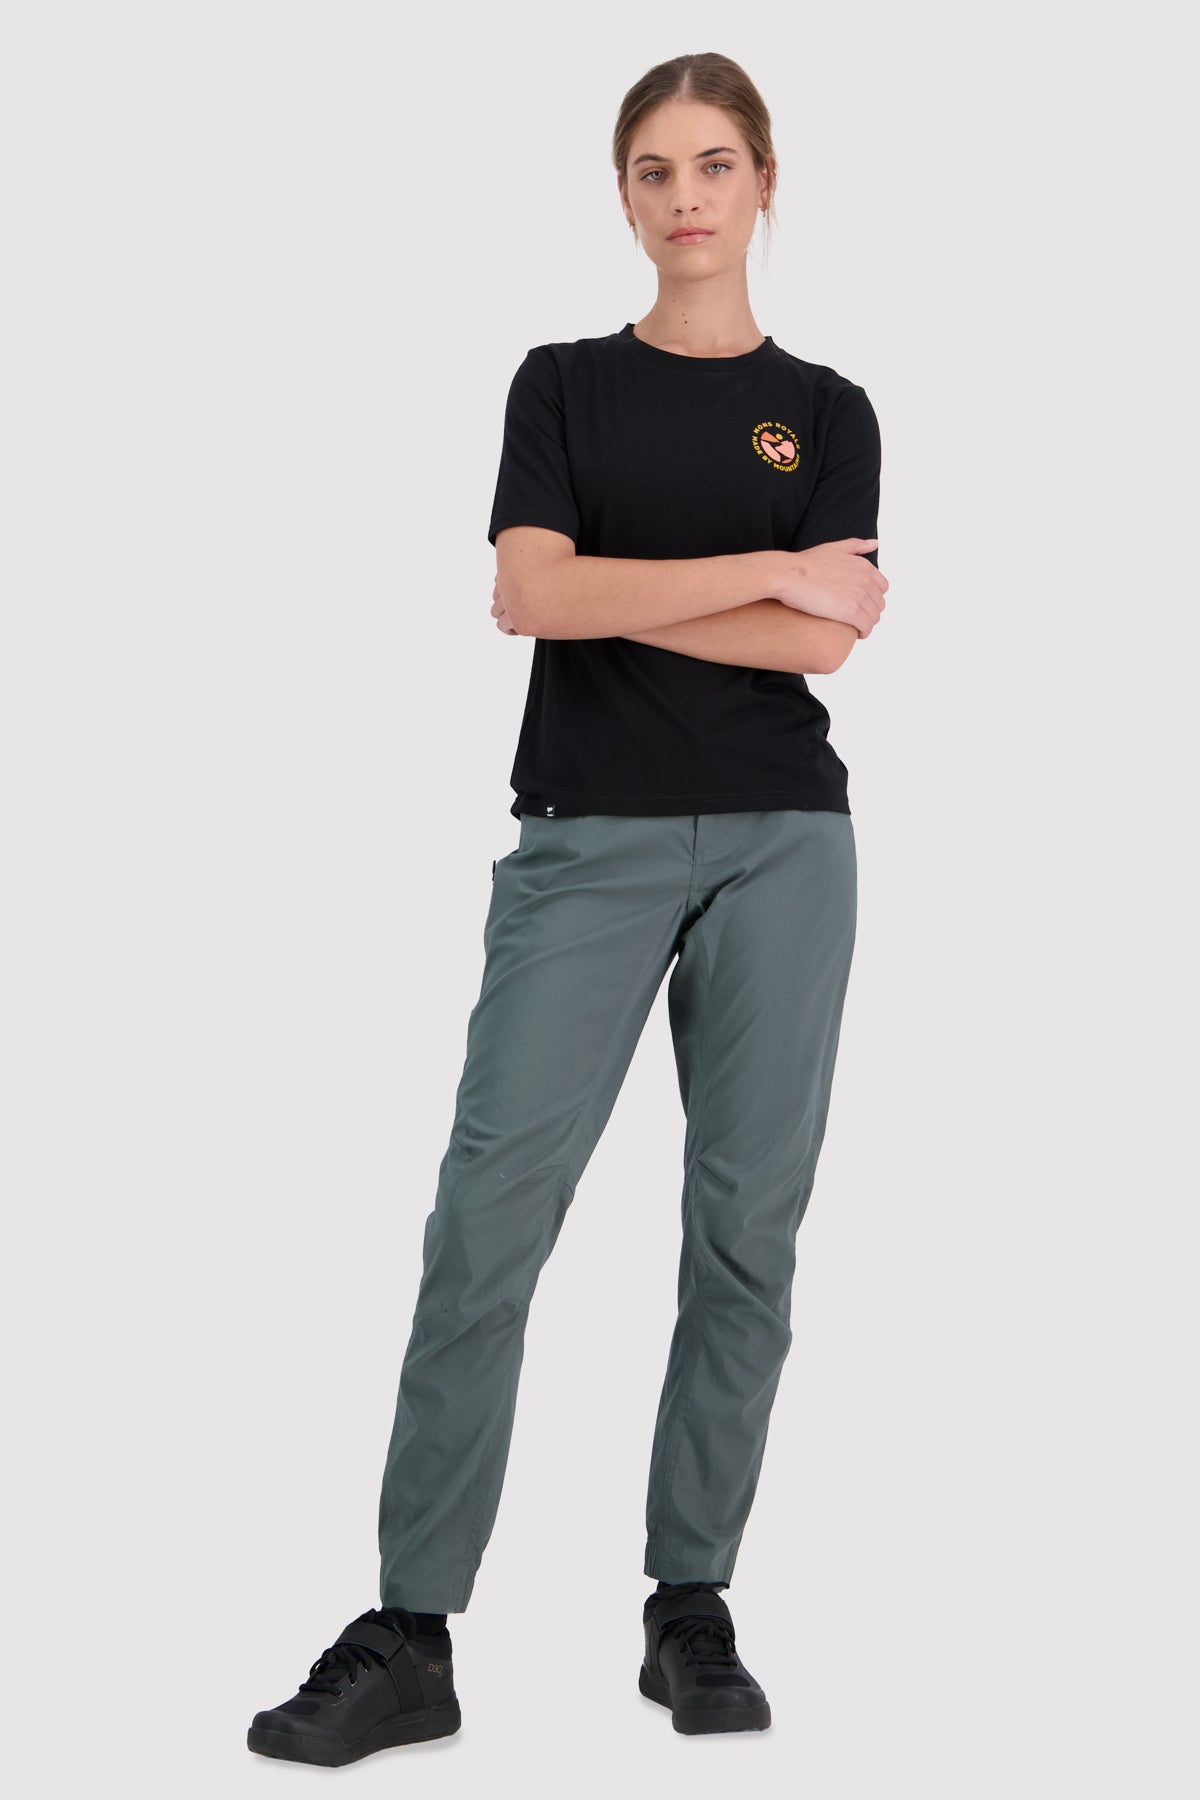 The Lab: Mons Royale Virage Pants tested extensively